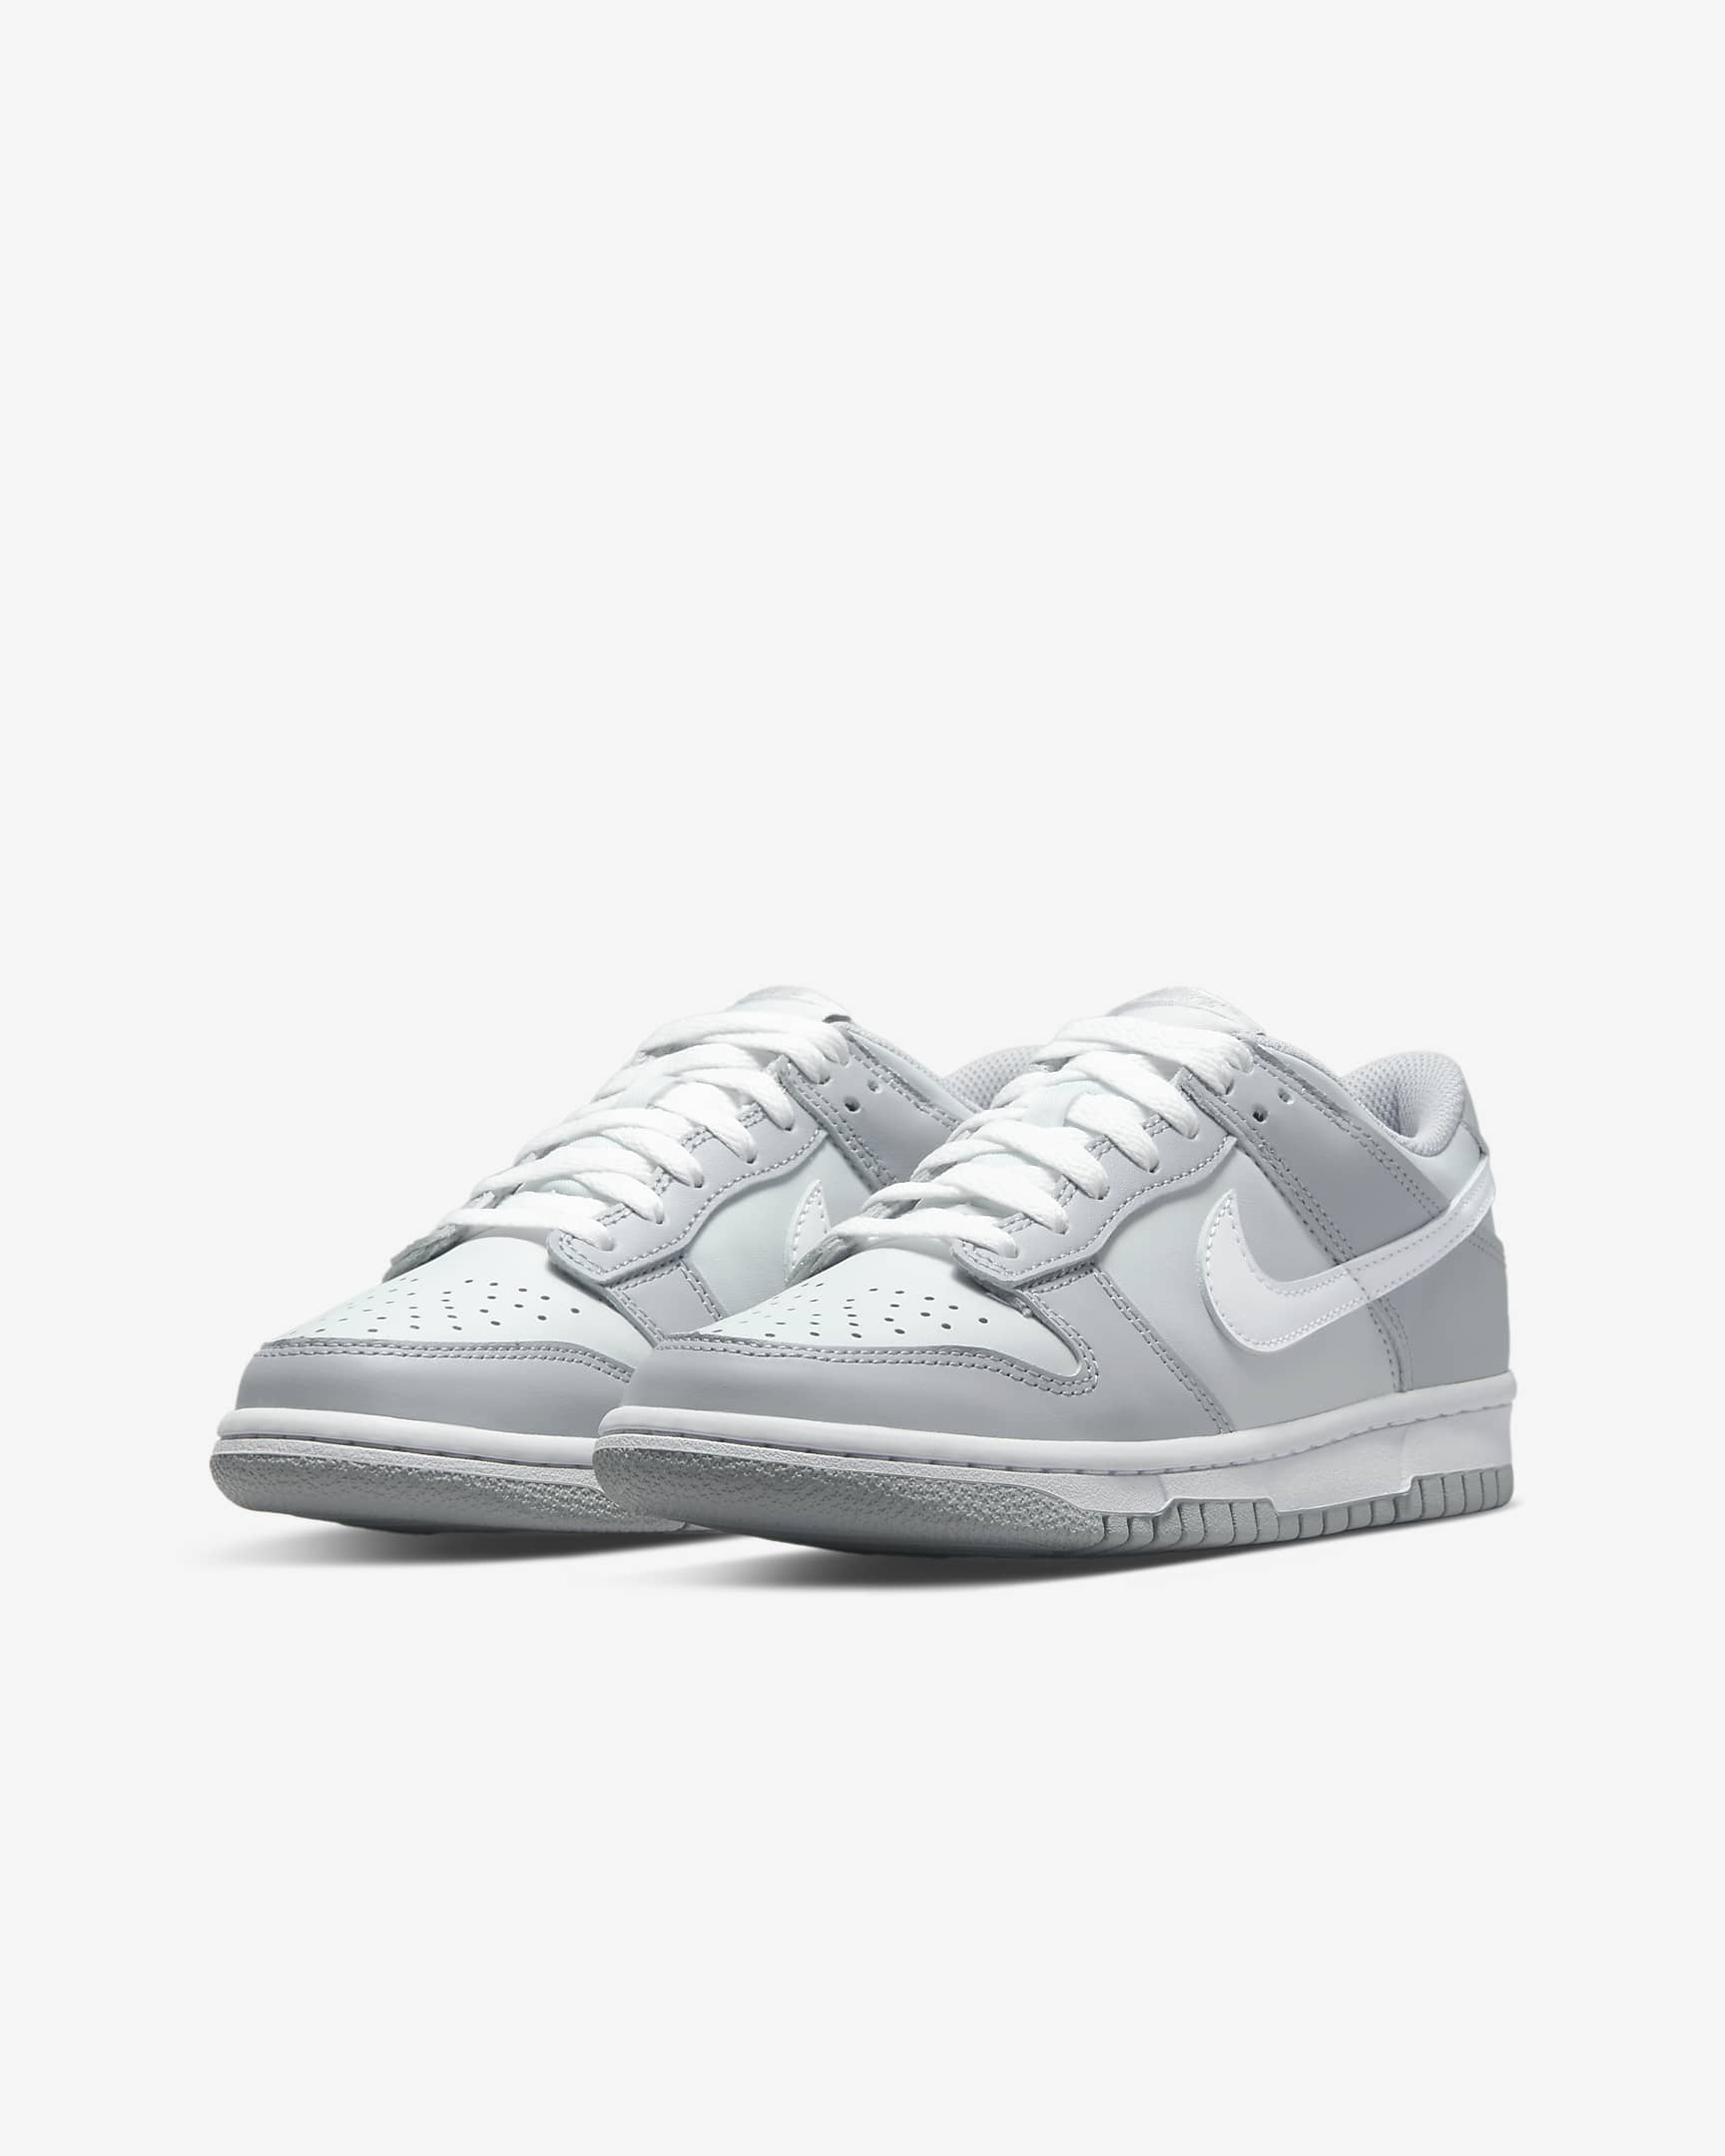 Nike Dunk Low Big Kids' Shoes - Pure Platinum/Wolf Grey/White